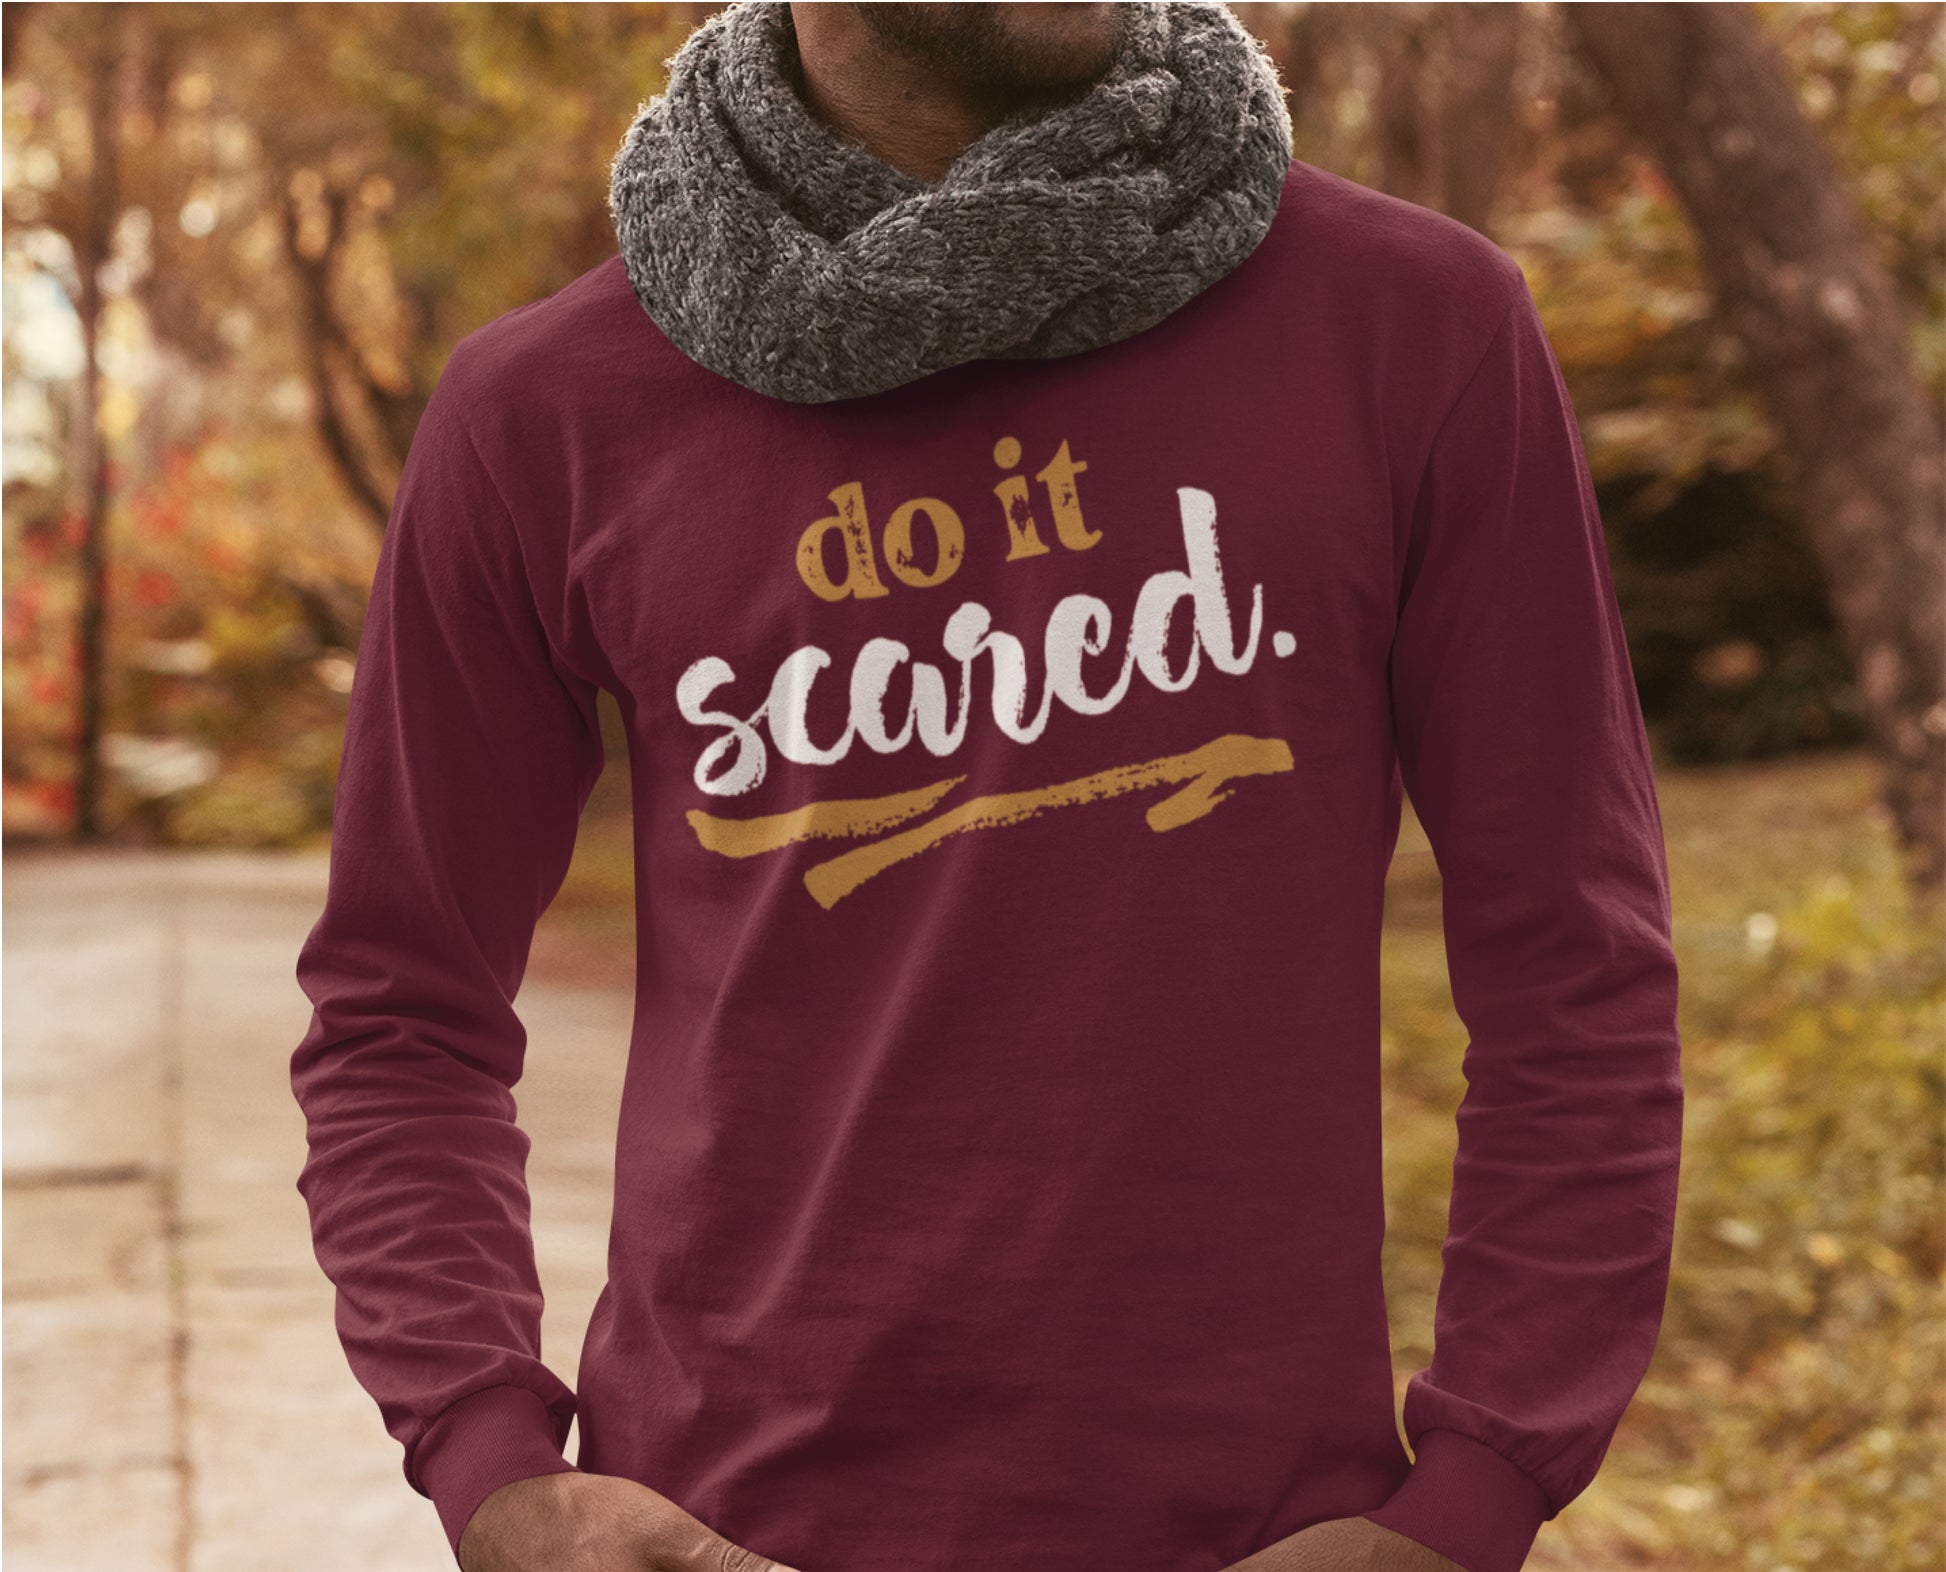 Do It Scared faith over fear 2 Timothy 1:7 do not fear bible verse Christian aesthetic design printed in white and gold on soft maroon unisex long sleeve tee shirt for women and men